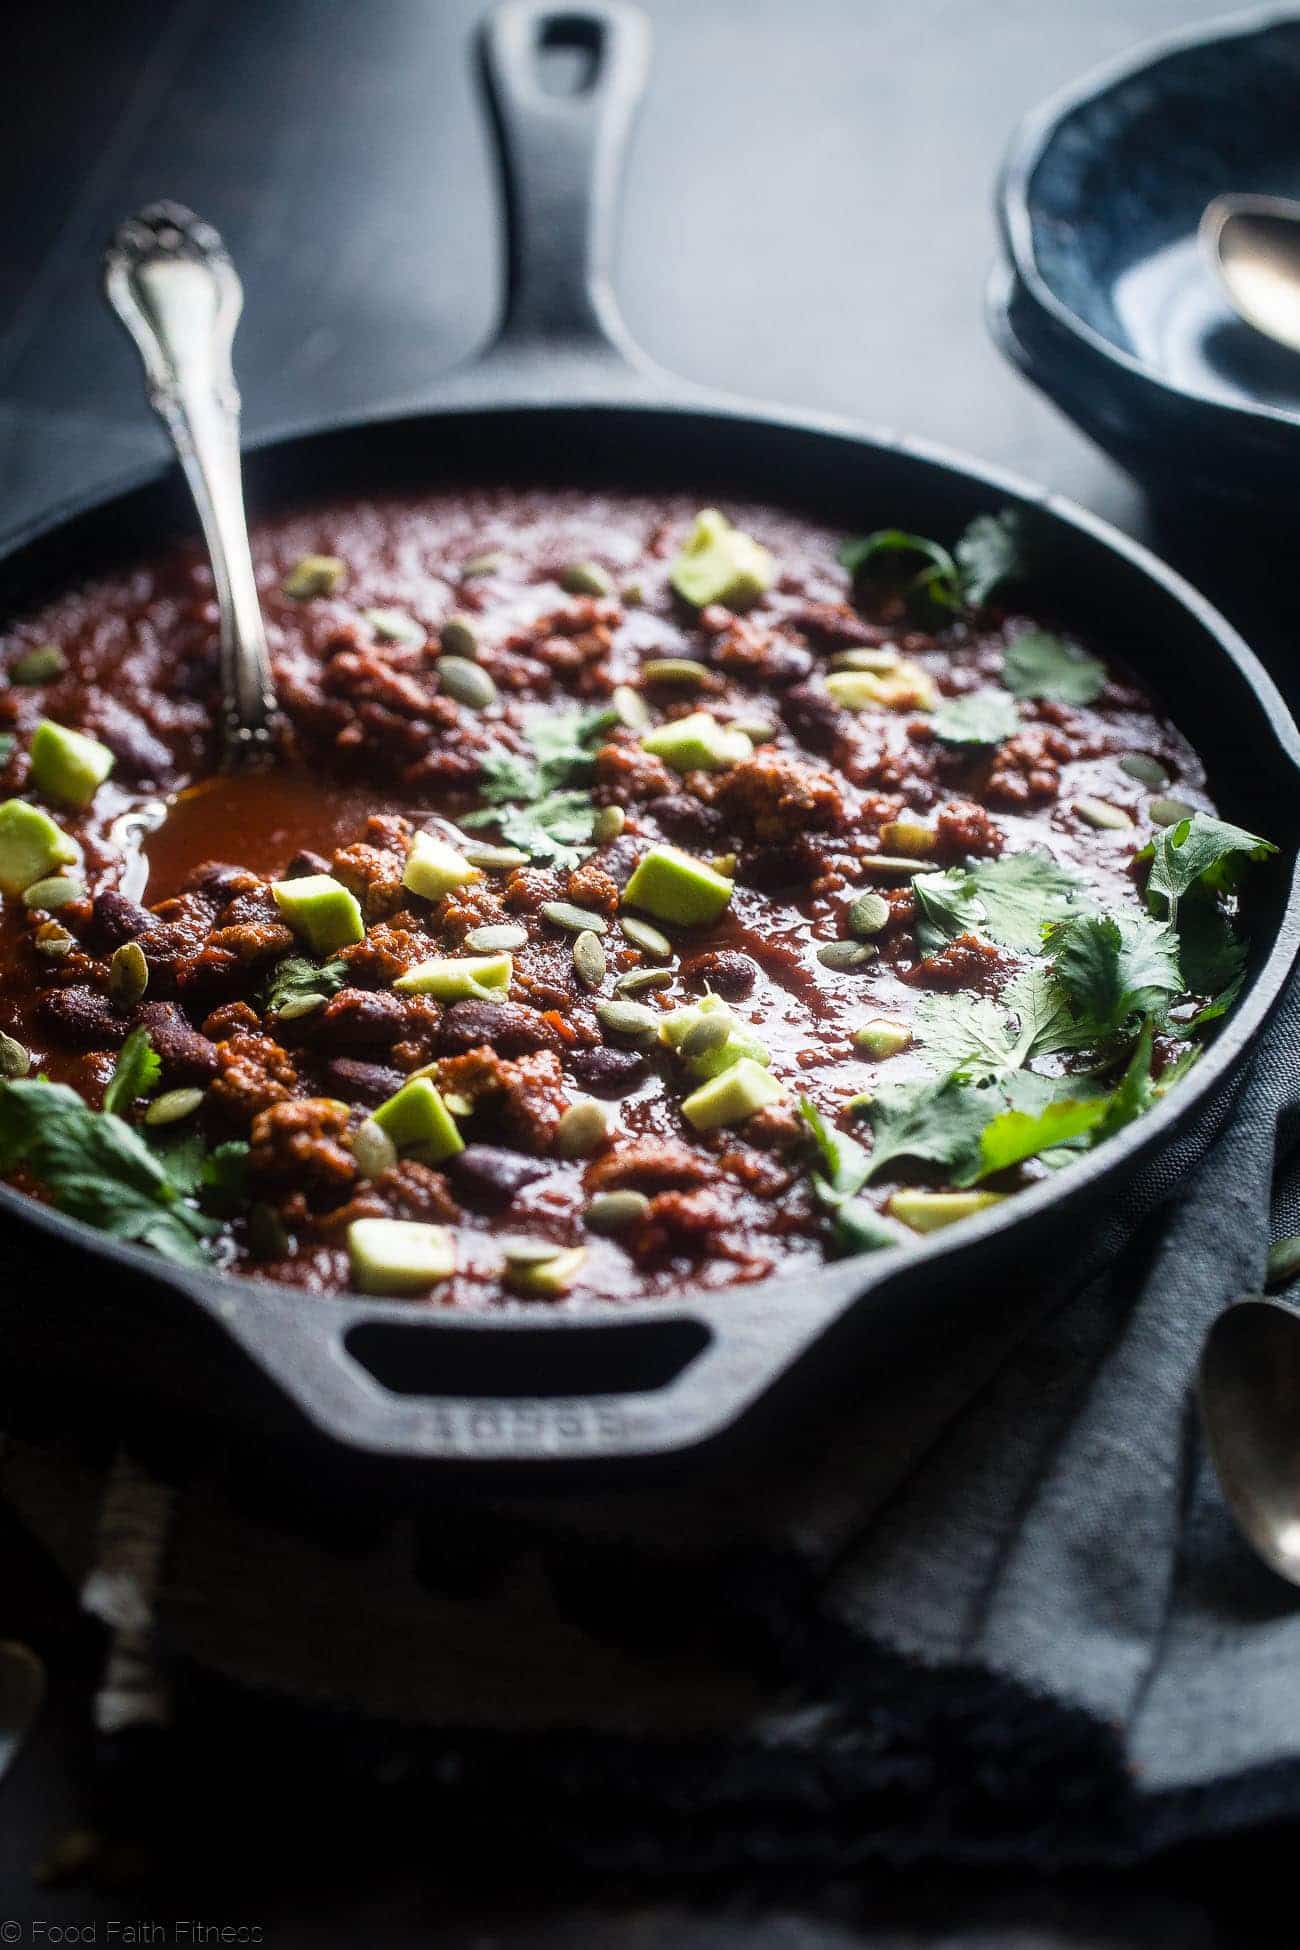 One-Pot Smoky and Sweet Turkey Chili - This turkey chili is an easy and gluten free weeknight meal that's perfect for cold, winter nights. It's healthy comfort food that the whole family will love! | Foodfaithfitness.com | @FoodFaithFit